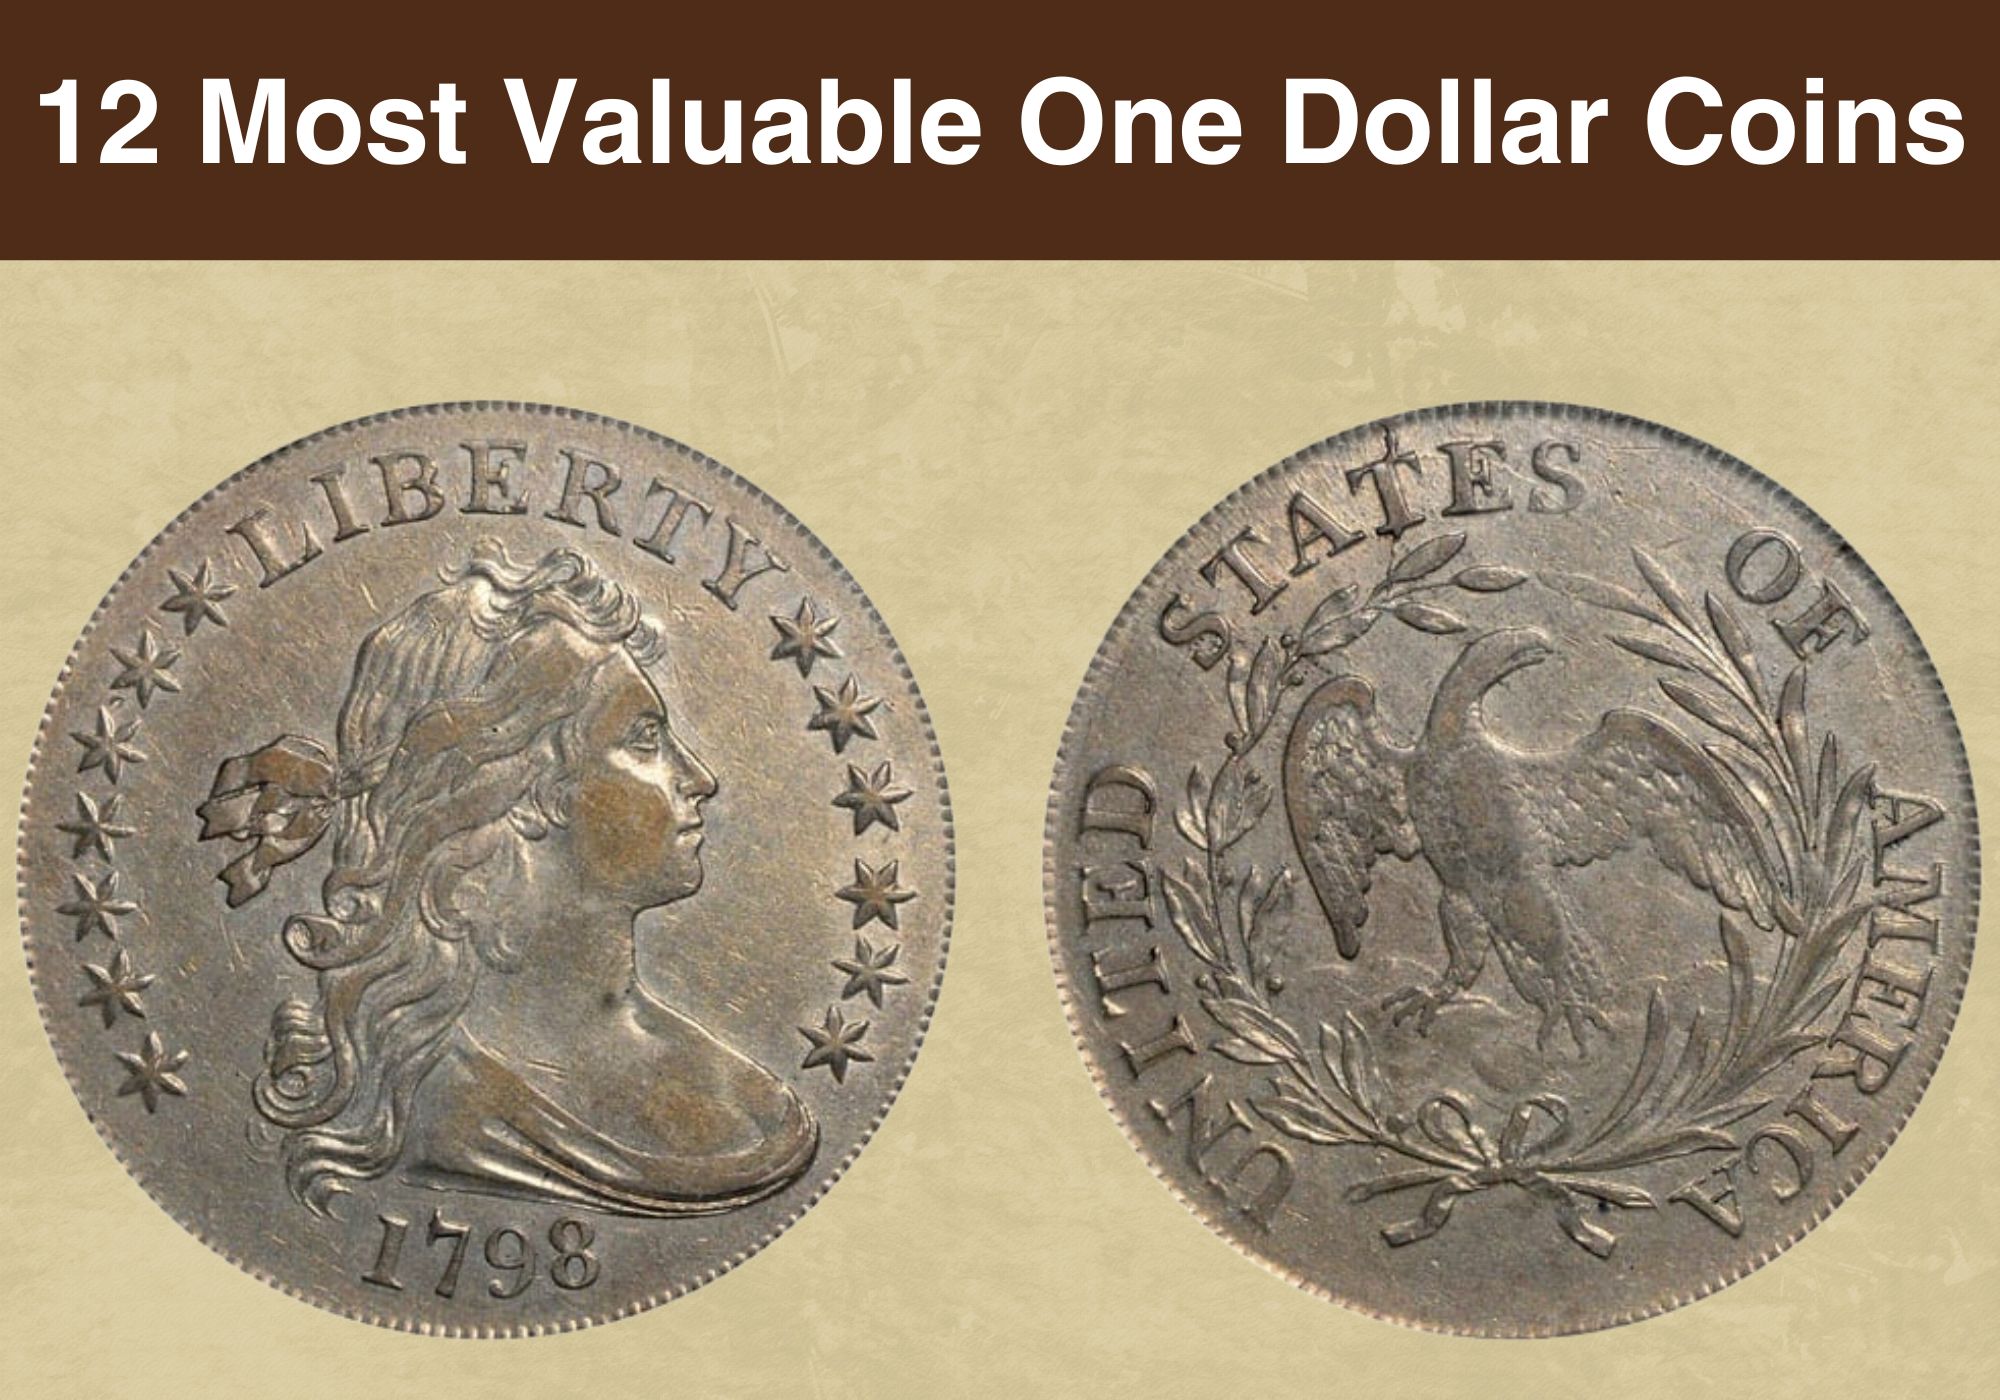 6 Most Valuable Coins in the World & What They Have in Common